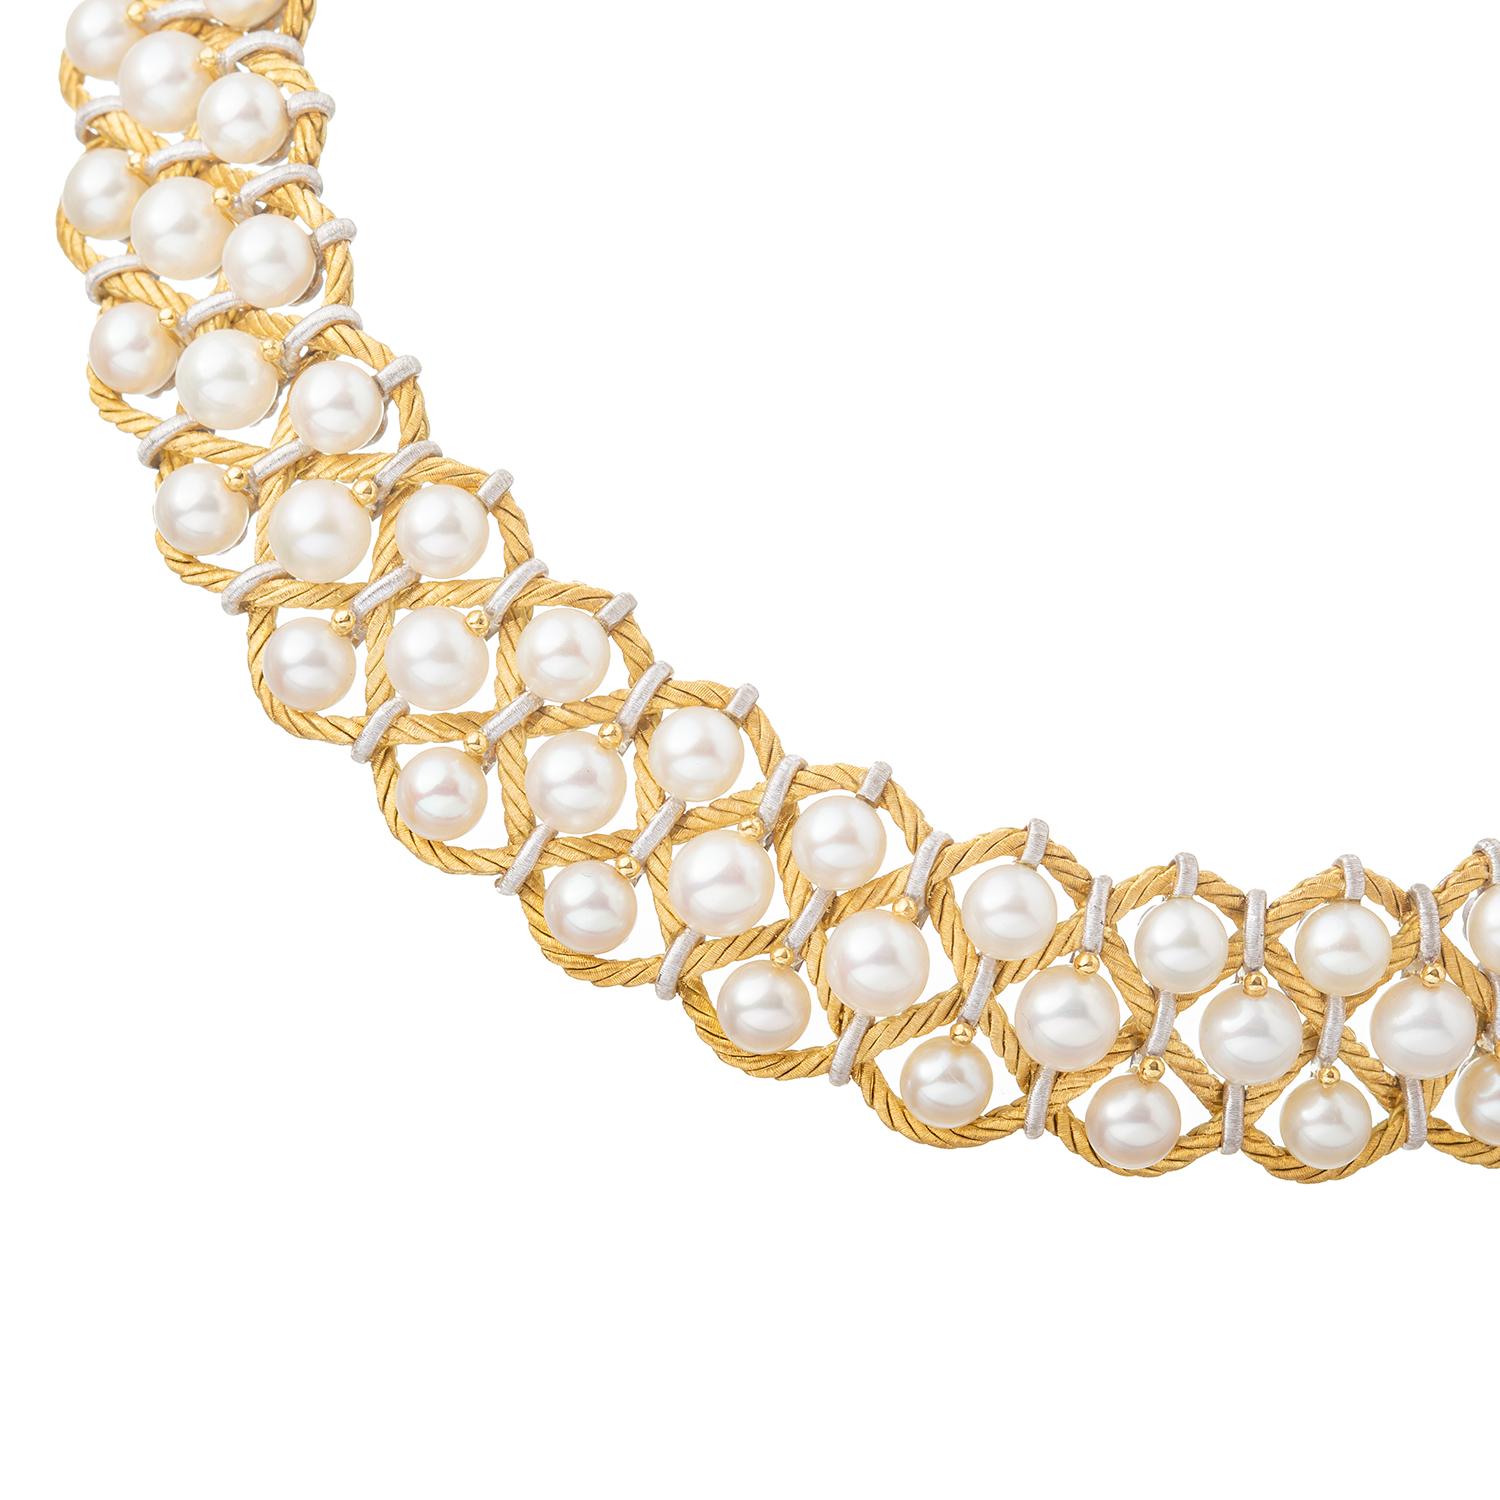 This 'Rete' pearl collar necklace by Italian designer Buccellati has a triple row of cultured pearls set in a braided woven design.  The flexible collar measures approximately 20mm wide and 15 inches long.  Set with one hundred-three round Akoya